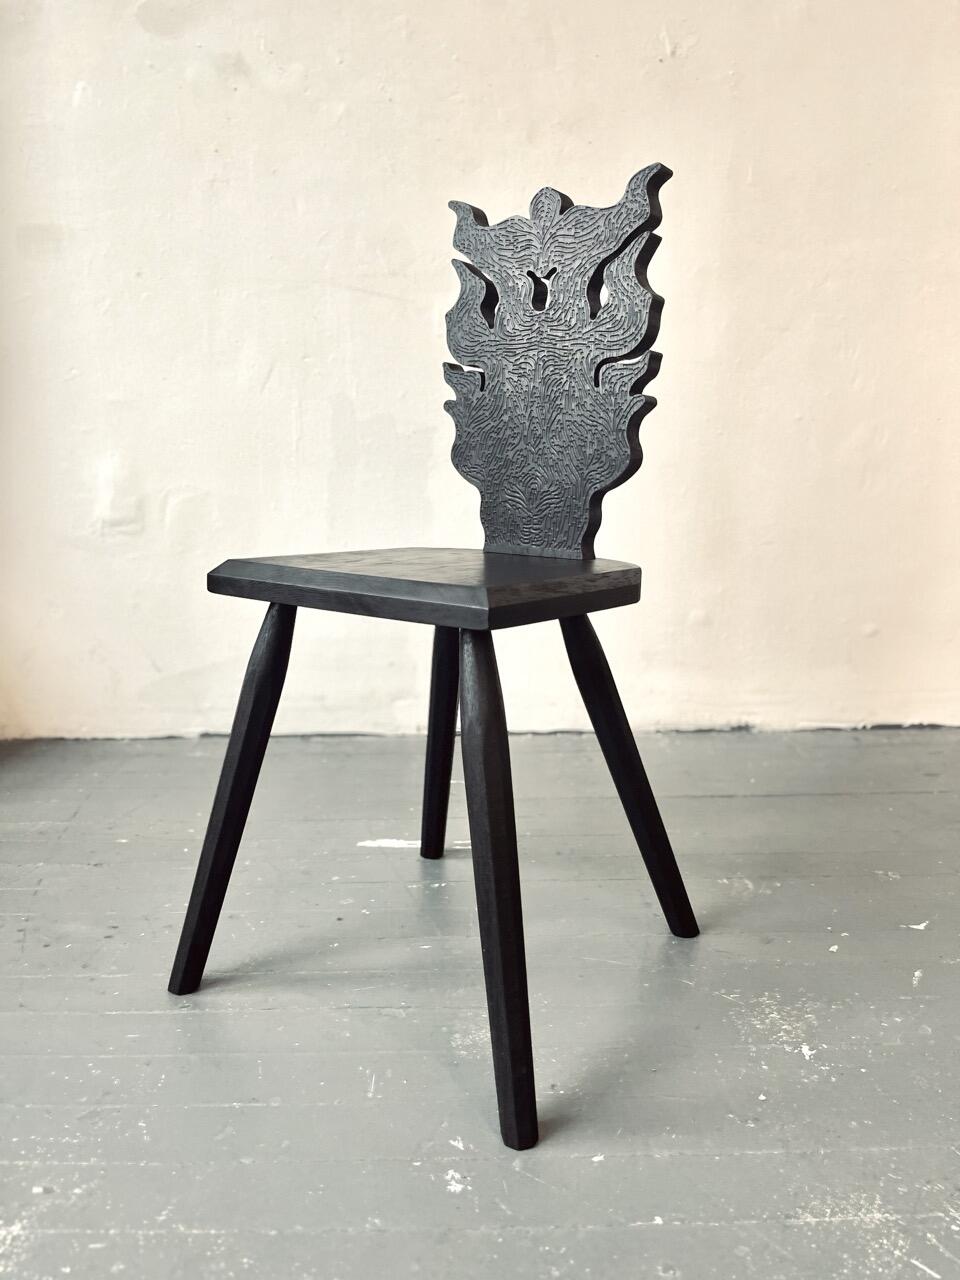 A black chair stands on a wooden floor. The base of the chair is simple, utilitarian and the back is intricately carved.